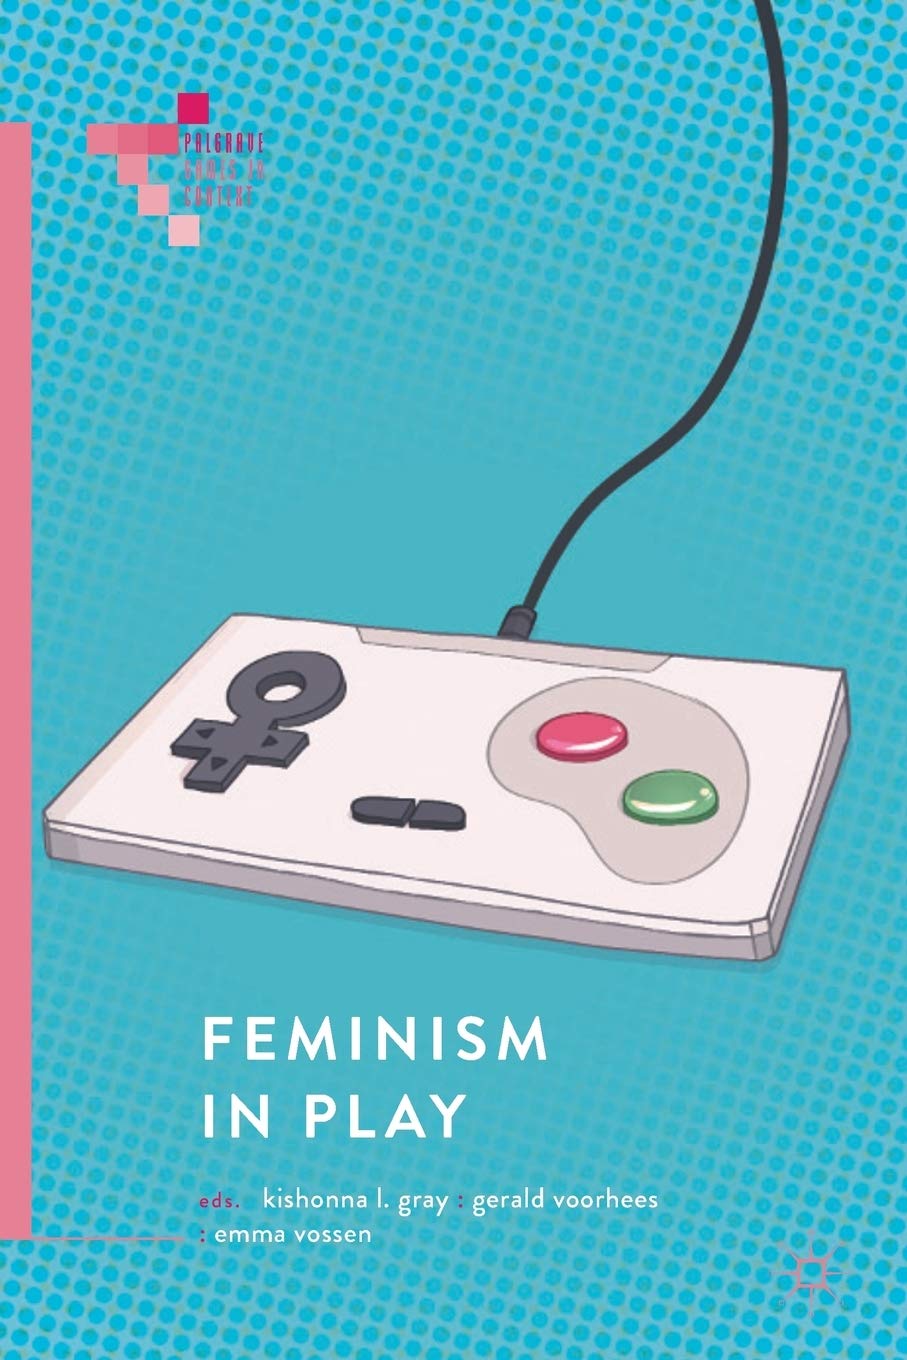 Feminism in Play (Palgrave Games in Context)